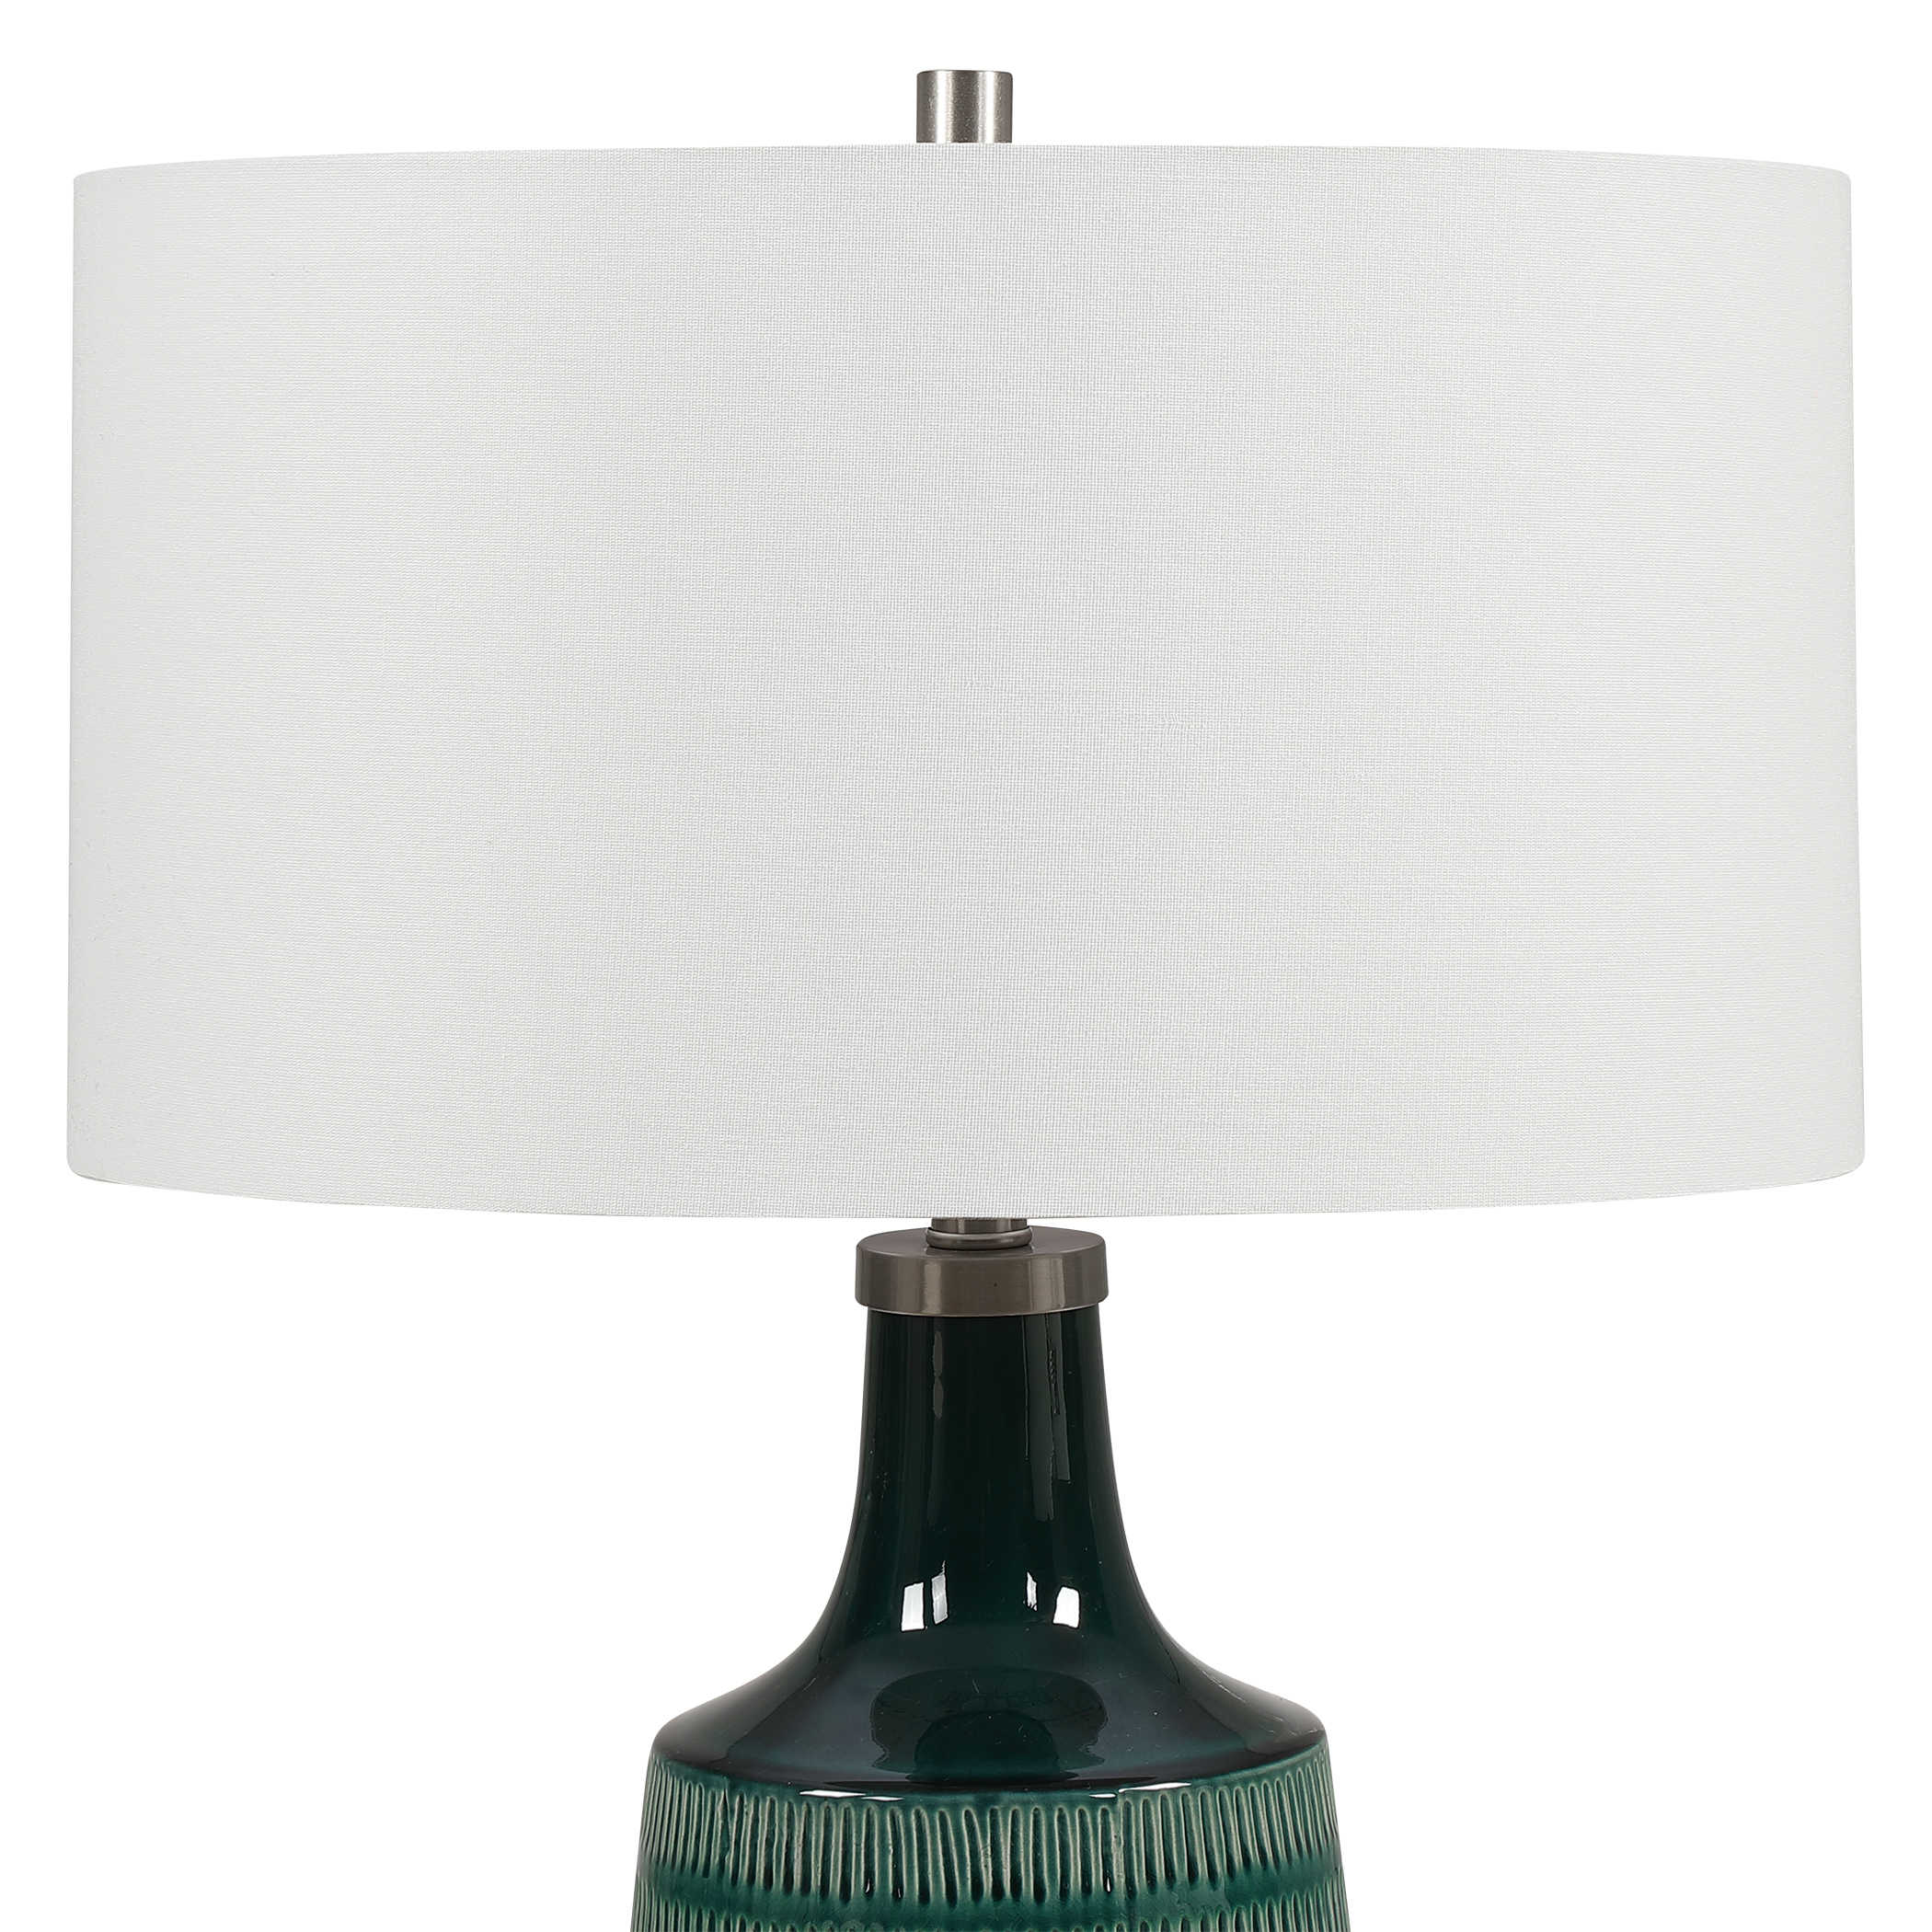 Scouts Teal Table Lamp Uttermost